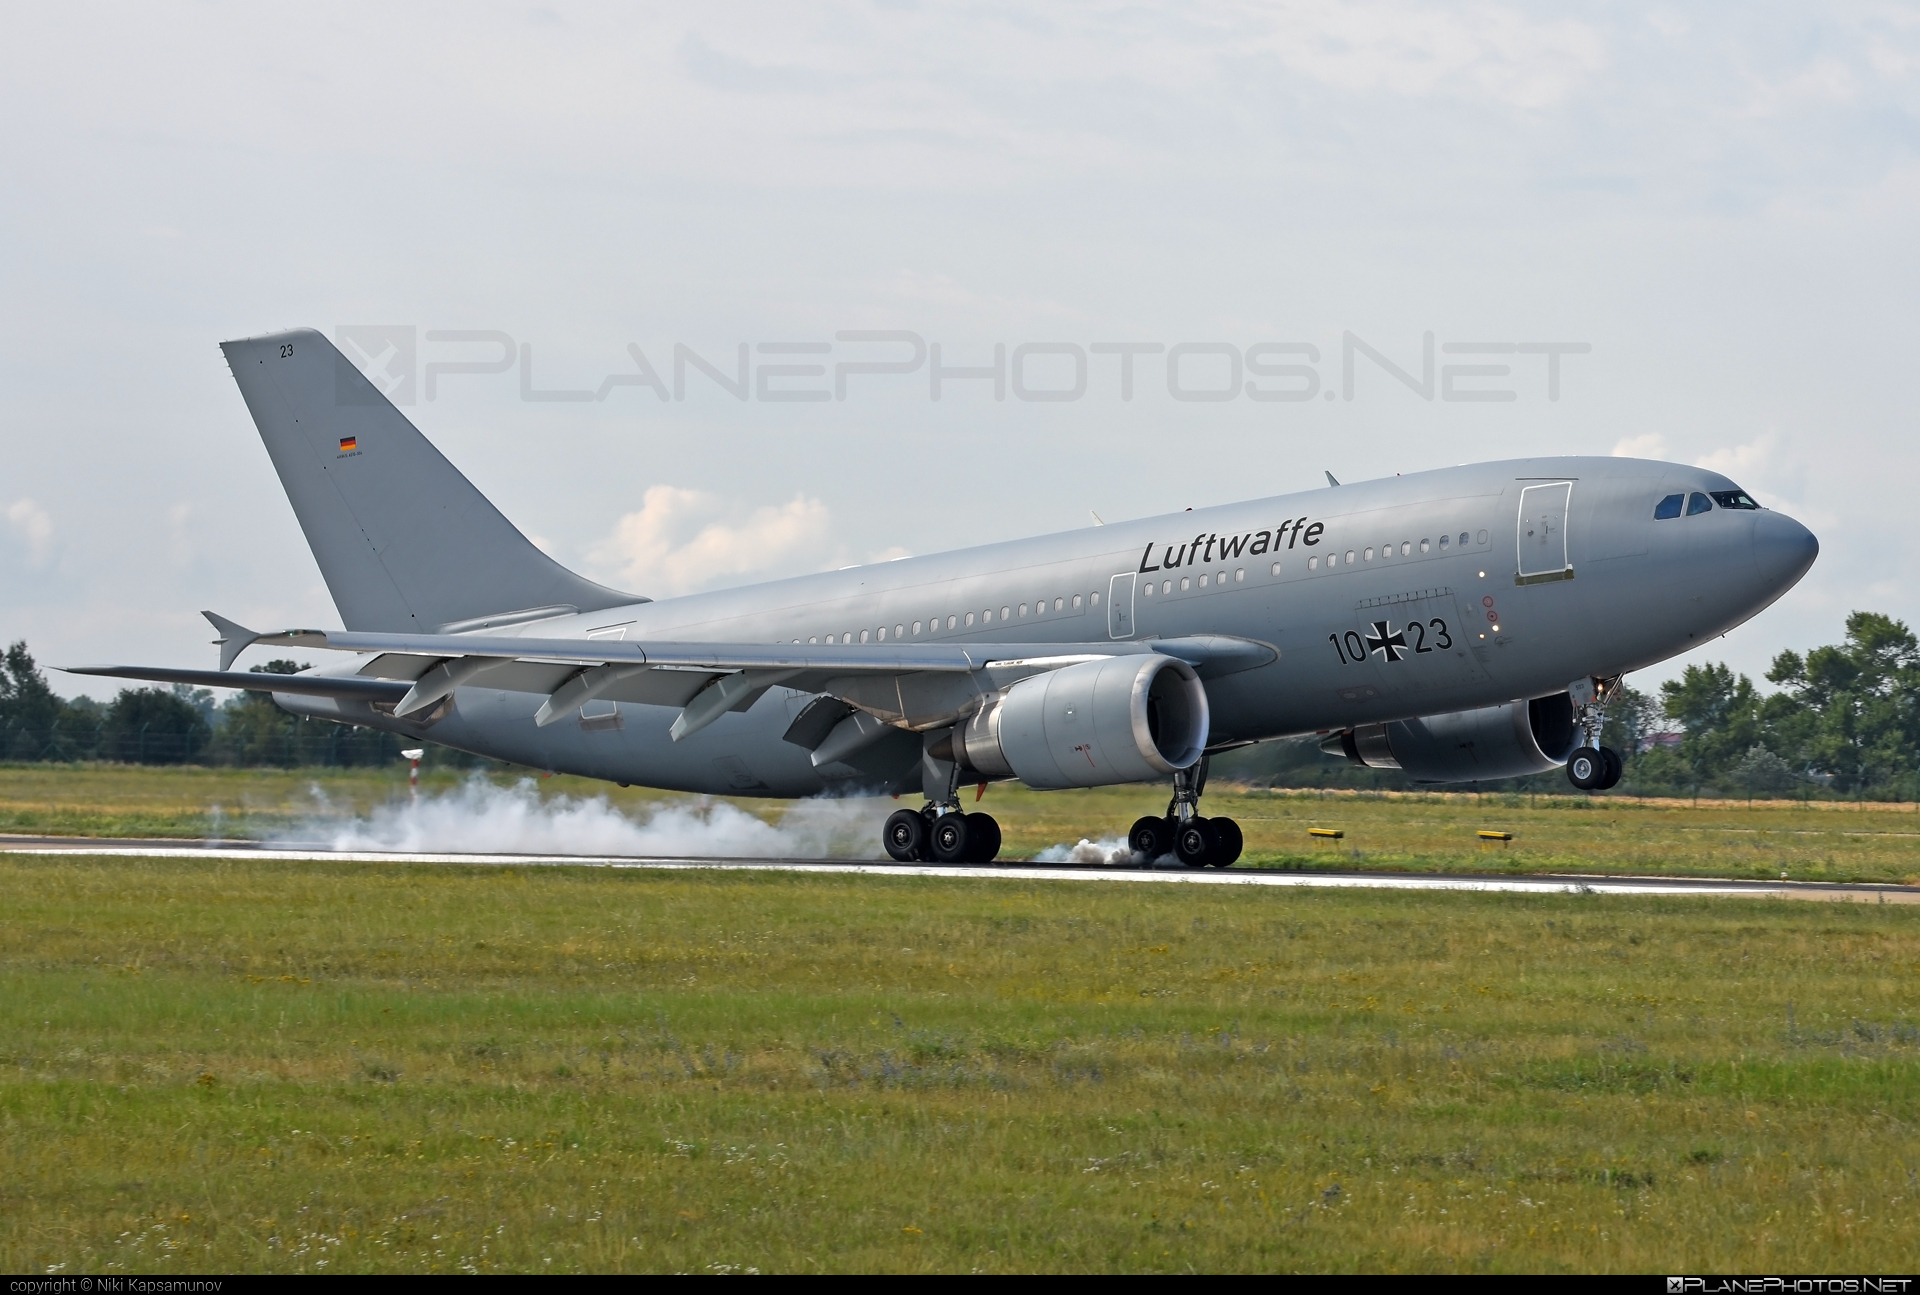 Airbus A310-304 - 10+23 operated by Luftwaffe (German Air Force) #GermanAirForce #a310 #airbus #airbus310 #luftwaffe